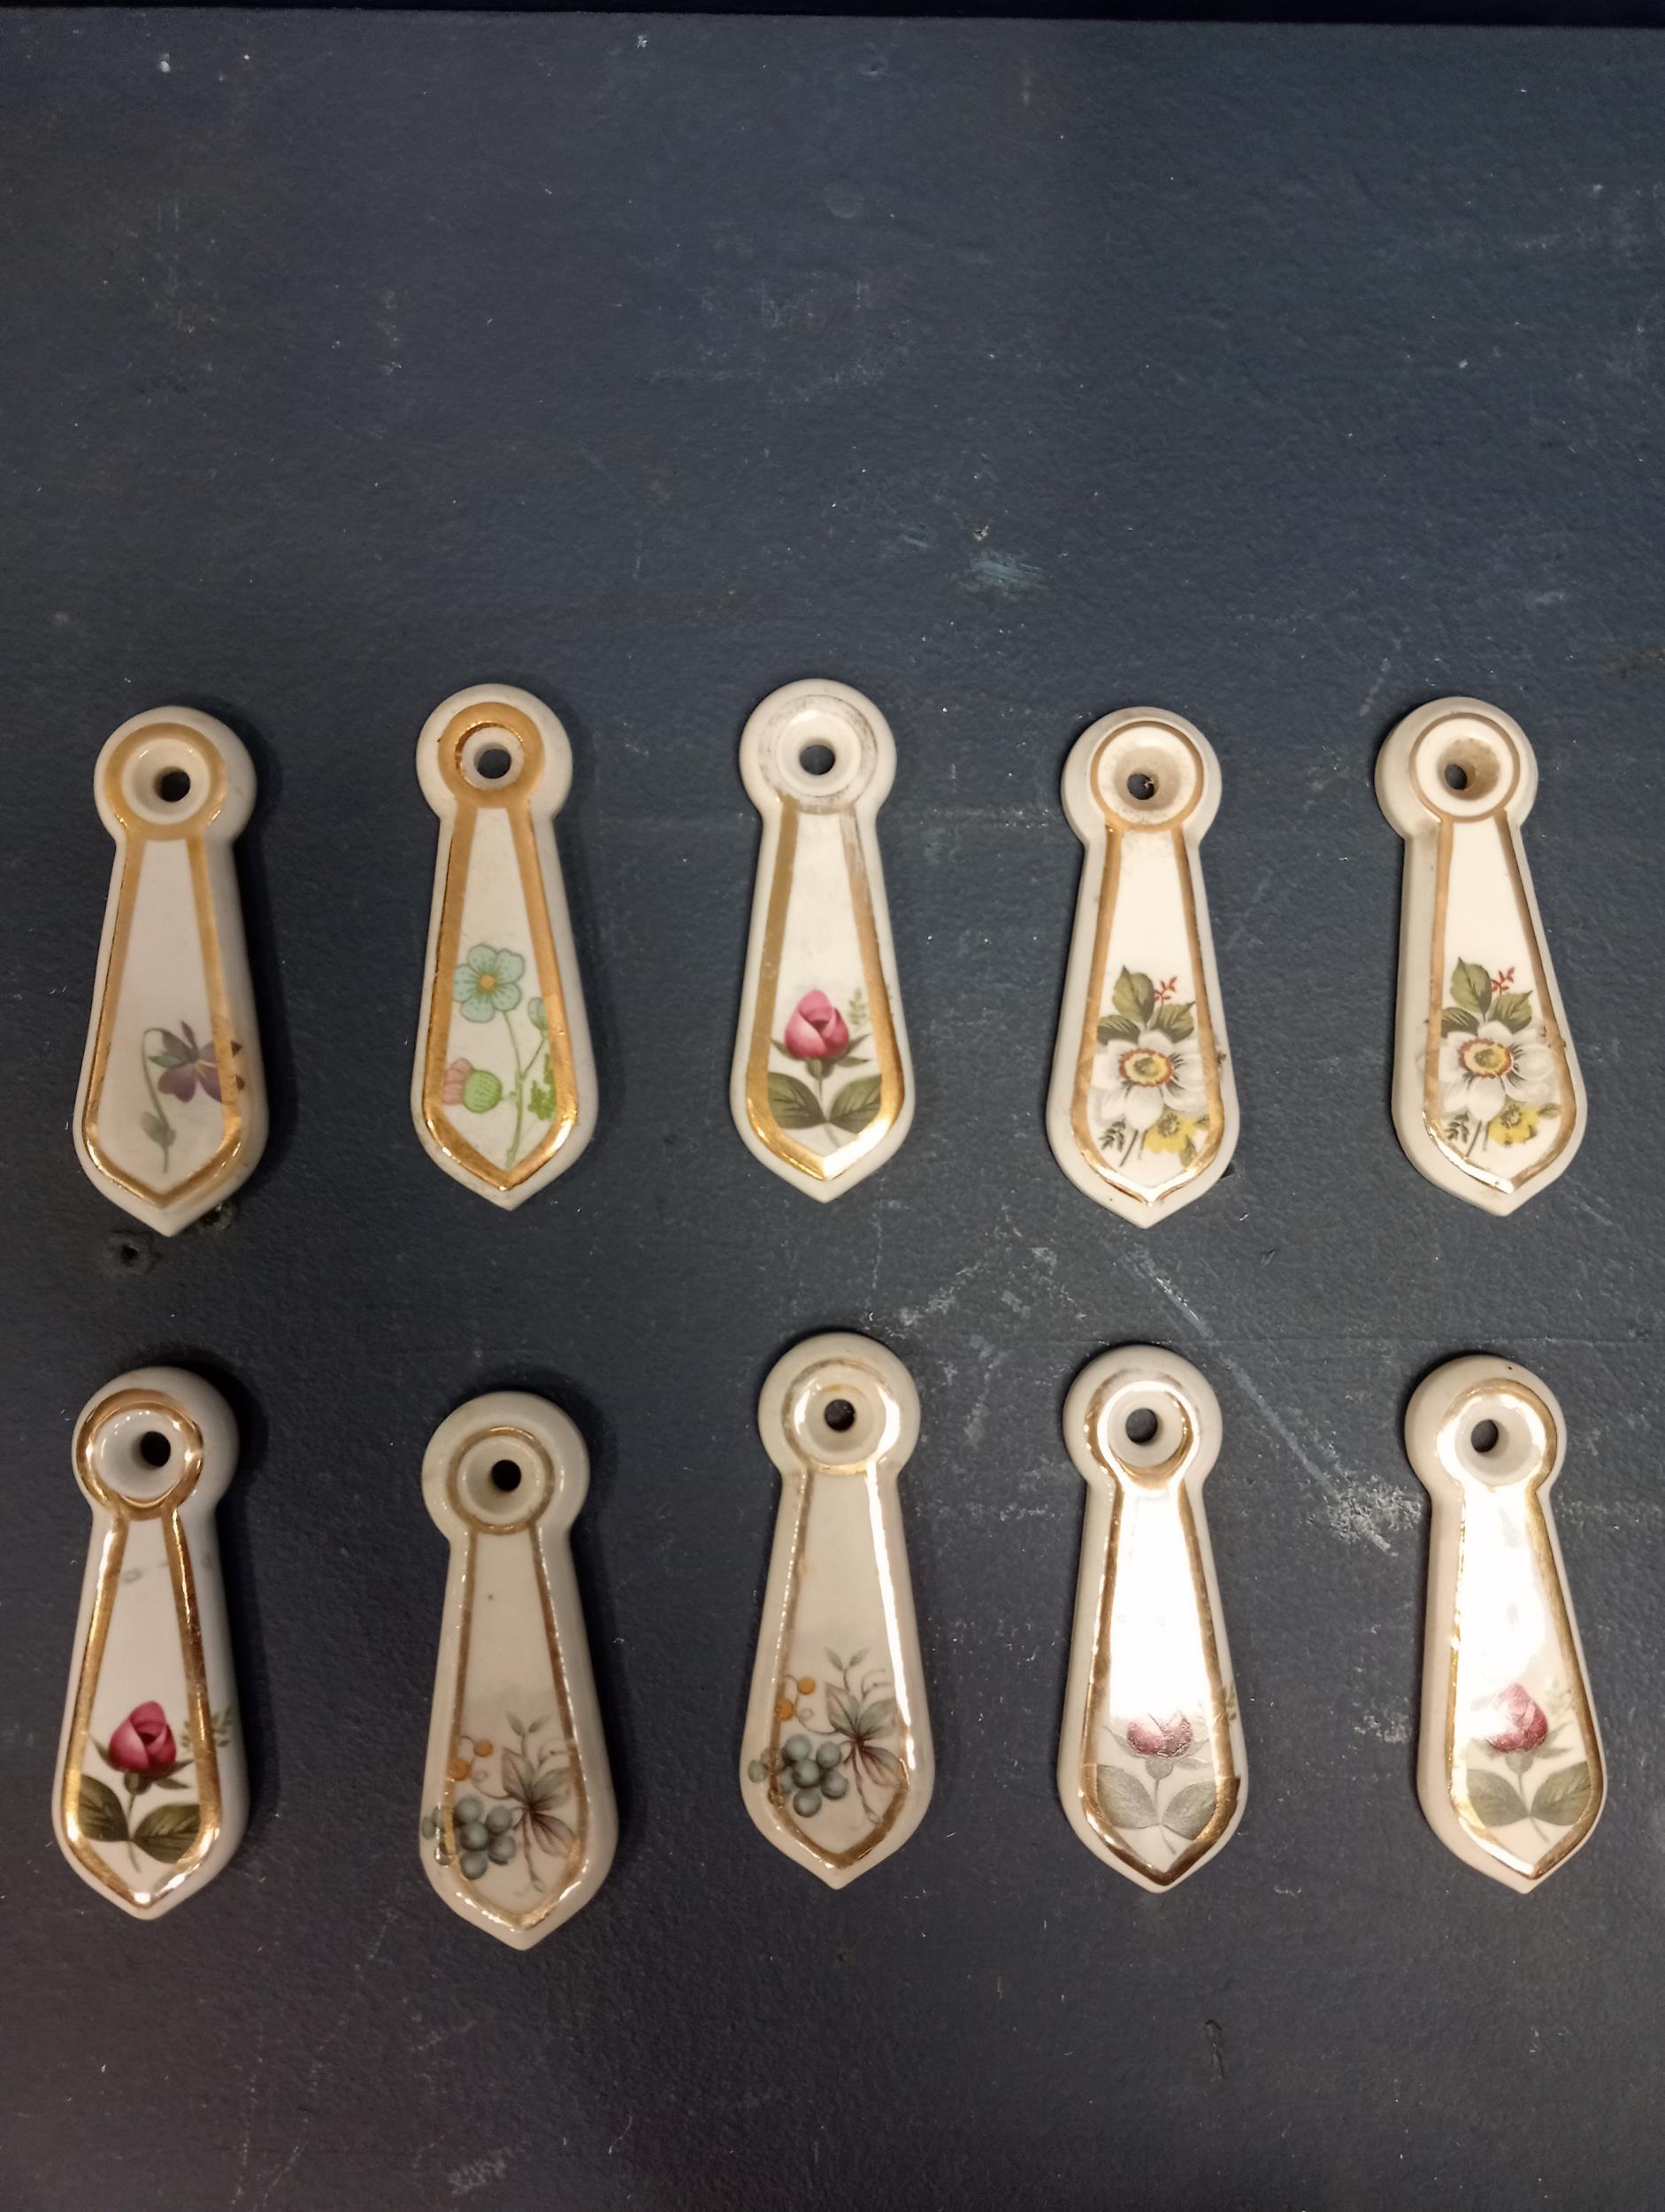 Collection of ten ceramic keyhole covers {H 7cm x W 2cm }.